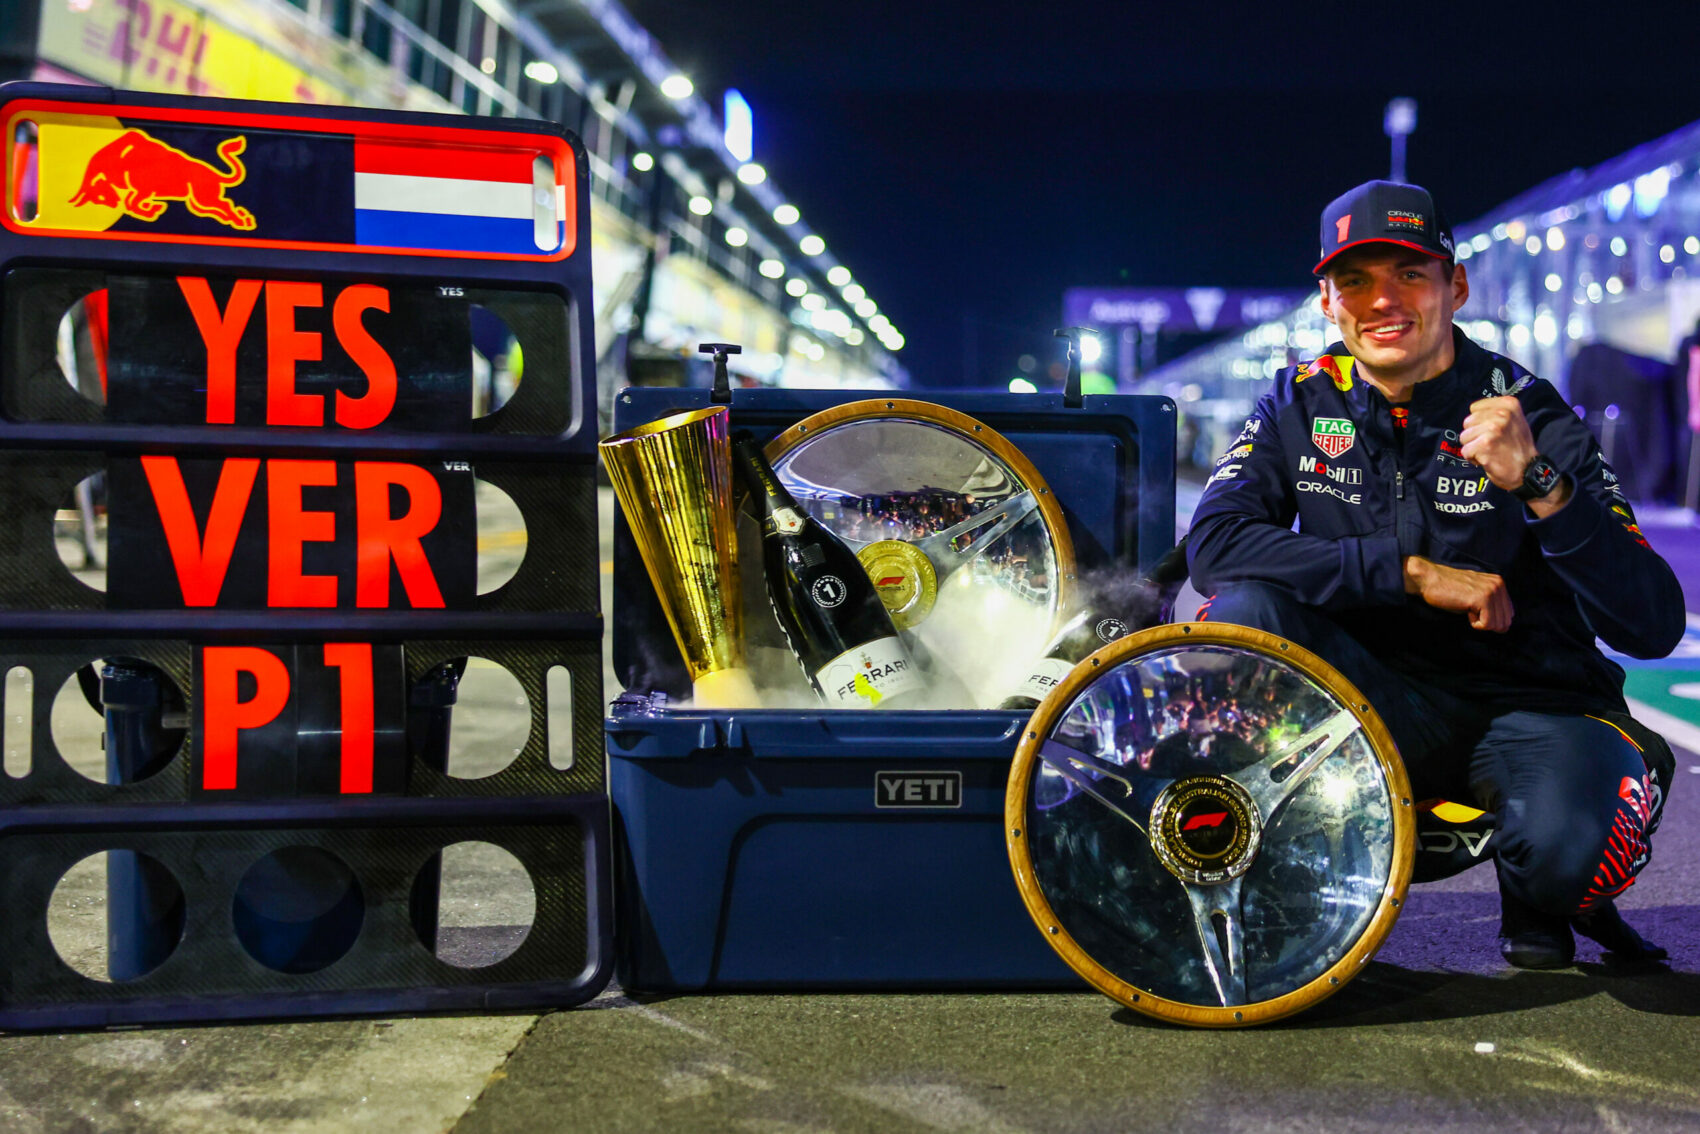 The statistic that Verstappen will definitely not be world champion this year